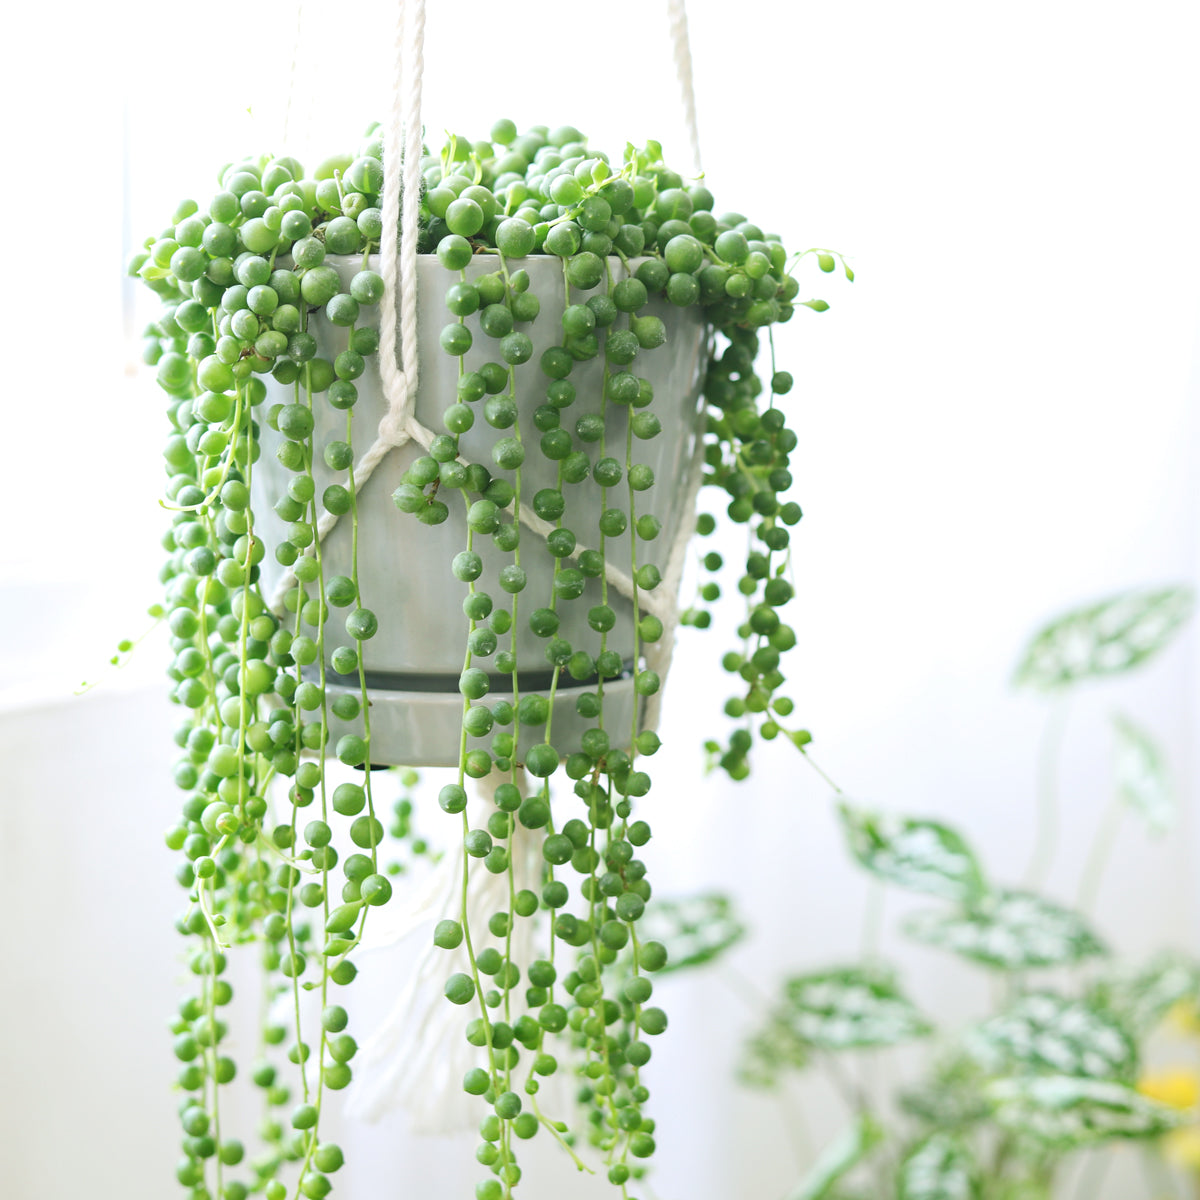 6 inch string of pearls in gray minimalist ceramic pot for sale, buy string of pearls hanging succulent online, succulent decor ideas, live succulent as gift